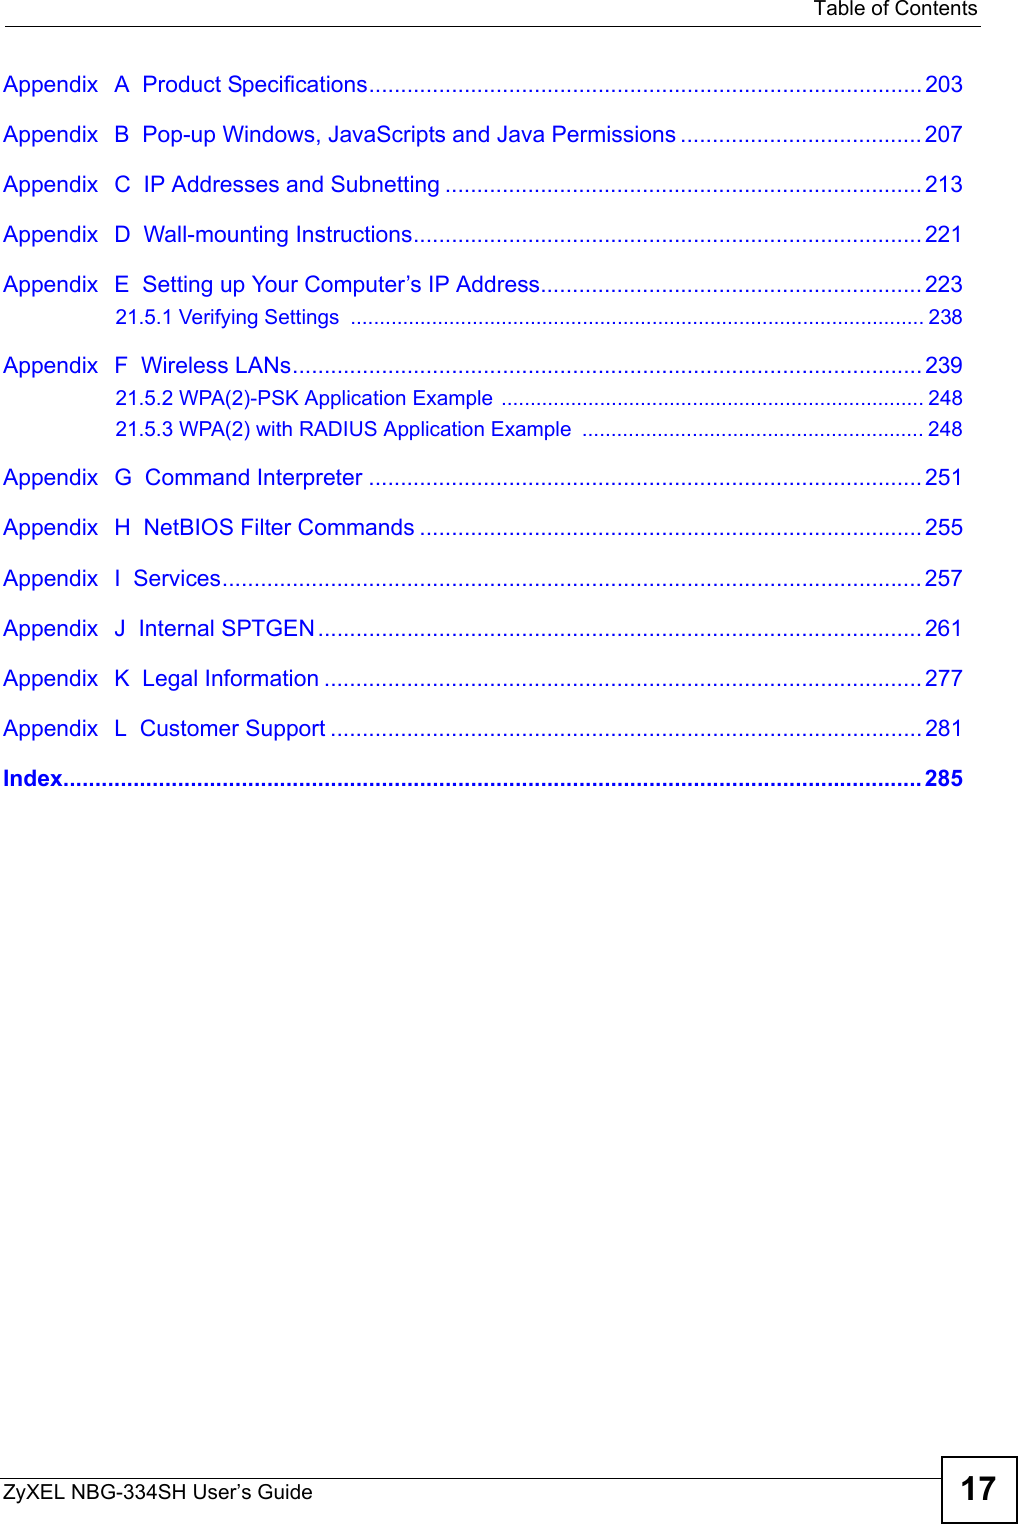   Table of ContentsZyXEL NBG-334SH User’s Guide 17Appendix   A  Product Specifications....................................................................................... 203Appendix   B  Pop-up Windows, JavaScripts and Java Permissions ...................................... 207Appendix   C  IP Addresses and Subnetting ........................................................................... 213Appendix   D  Wall-mounting Instructions................................................................................ 221Appendix   E  Setting up Your Computer’s IP Address............................................................22321.5.1 Verifying Settings  ................................................................................................... 238Appendix   F  Wireless LANs................................................................................................... 23921.5.2 WPA(2)-PSK Application Example ......................................................................... 24821.5.3 WPA(2) with RADIUS Application Example  ........................................................... 248Appendix   G  Command Interpreter .......................................................................................251Appendix   H  NetBIOS Filter Commands ............................................................................... 255Appendix   I  Services..............................................................................................................257Appendix   J  Internal SPTGEN............................................................................................... 261Appendix   K  Legal Information .............................................................................................. 277Appendix   L  Customer Support ............................................................................................. 281Index....................................................................................................................................... 285